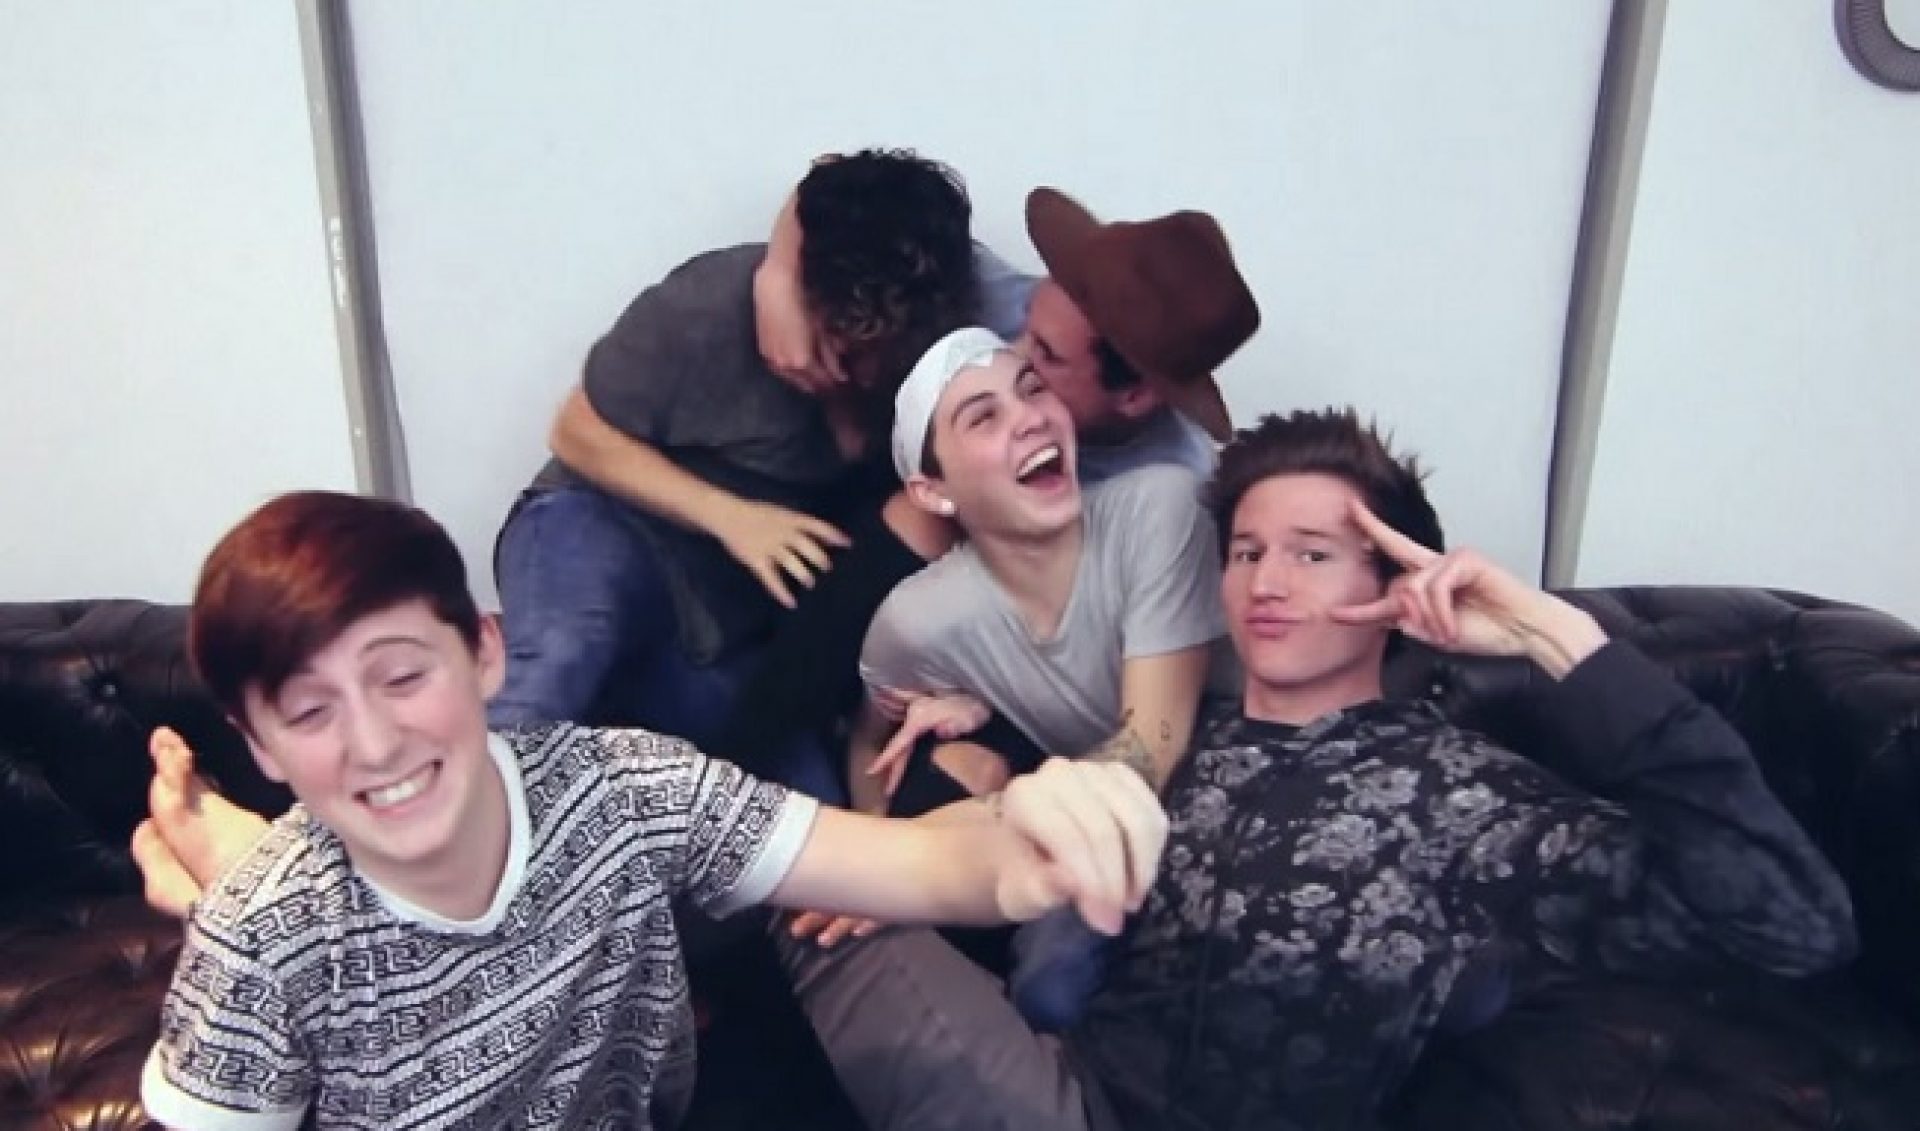 YouTube Supergroup Our2ndLife Is Disbanding Its Channel